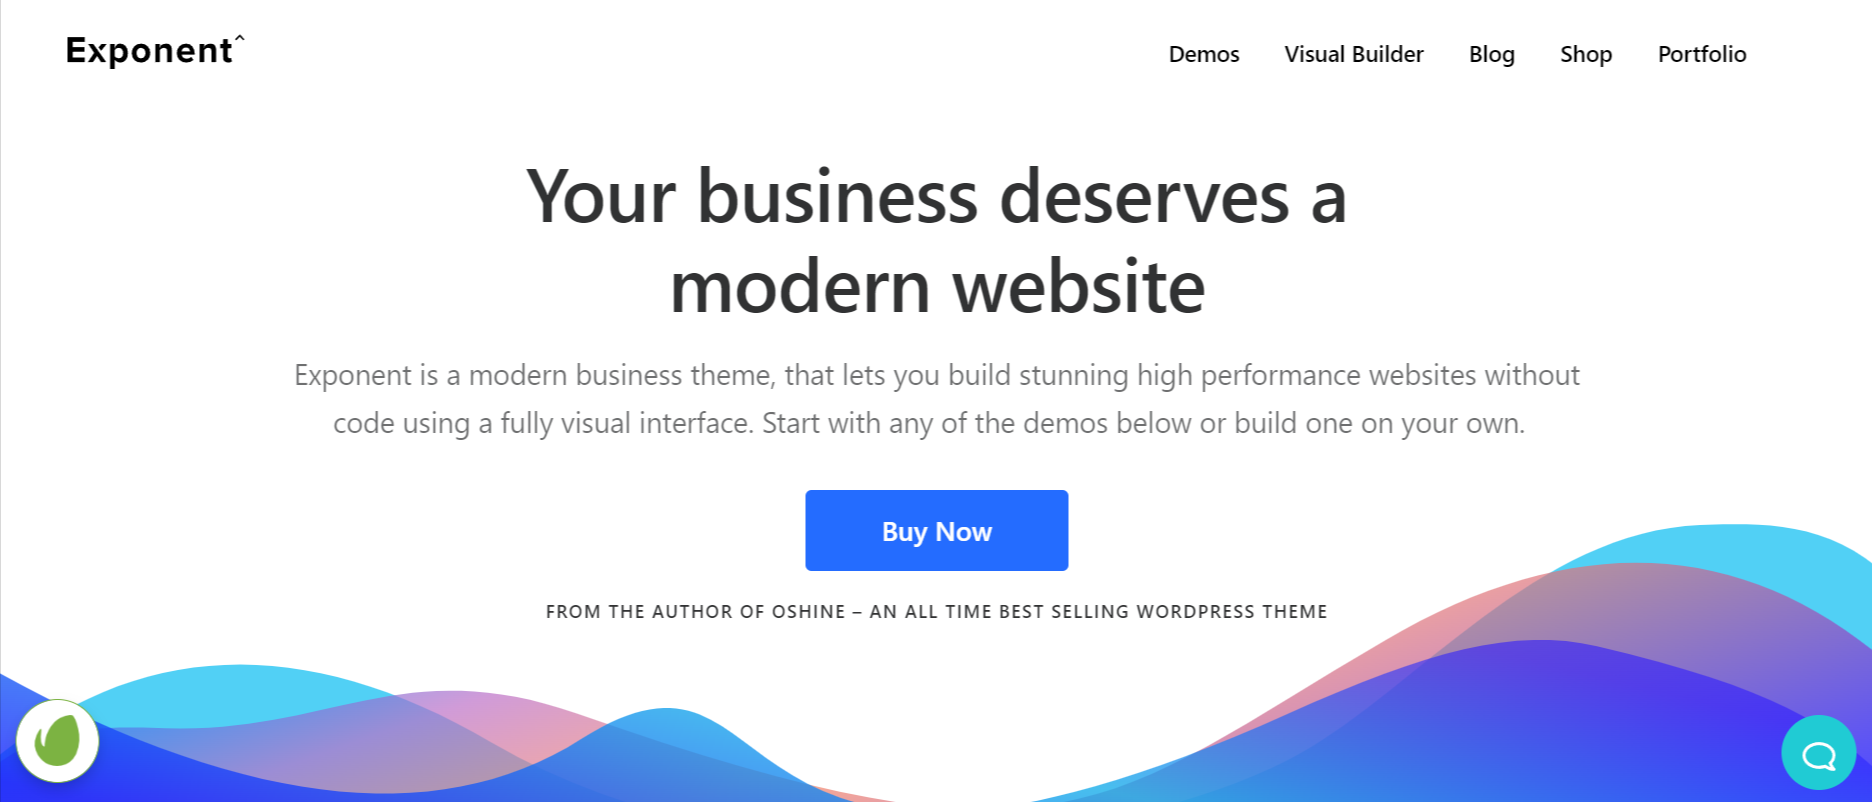 Exponent - WordPress Themes For Life Coaching Website